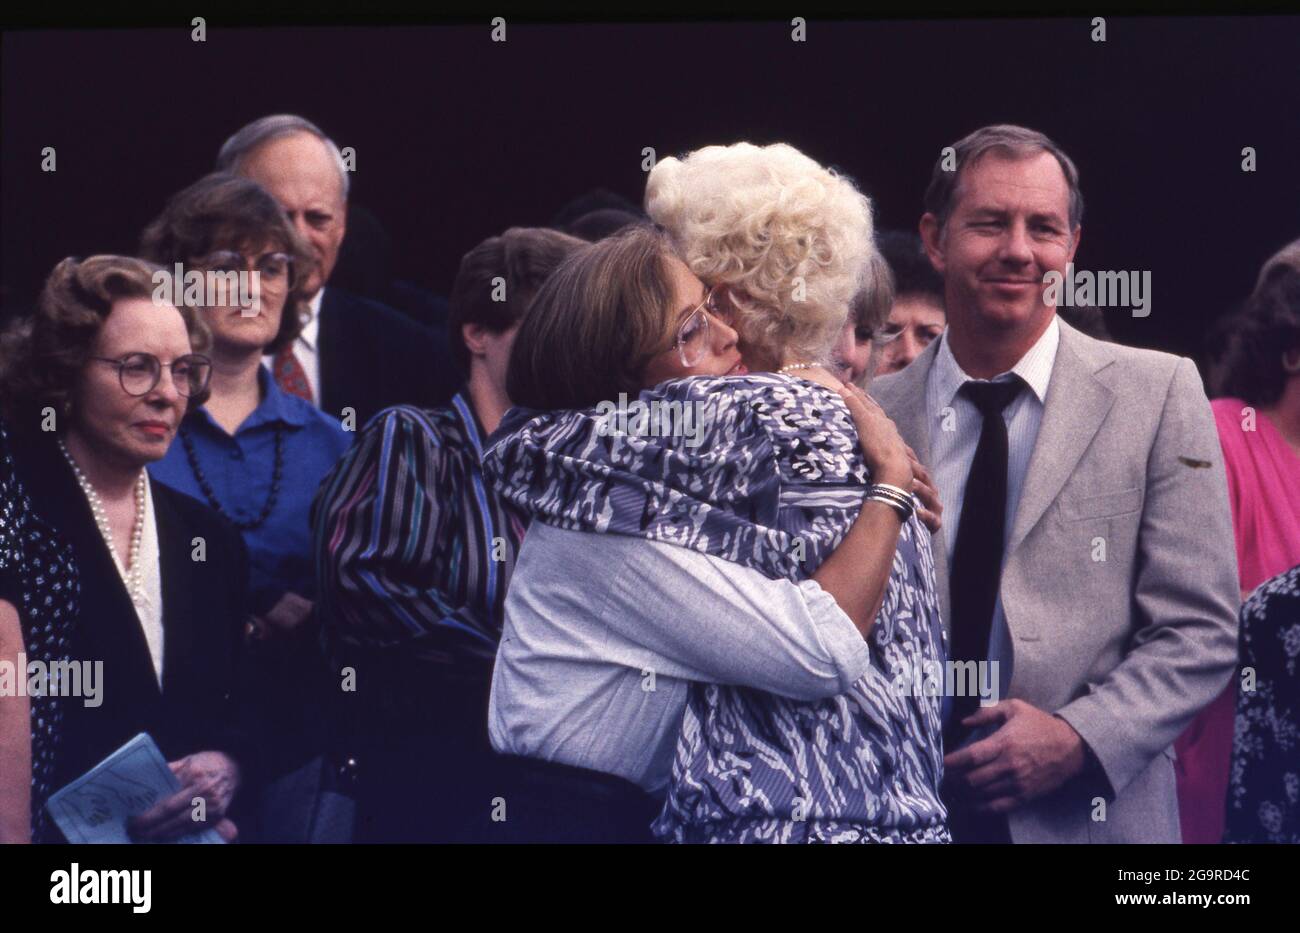 Killeen Texas USA, October 1991: Mourners embrace after a funeral service for one of the victims of a mass shooting at Luby's Cafeteria in Killeen. on October 16. George Hennard, a 35-year-old Killeen resident, crashed a pickup into the eatery and shot 23 people to death before killing himself. ©Bob Daemmrich Stock Photo